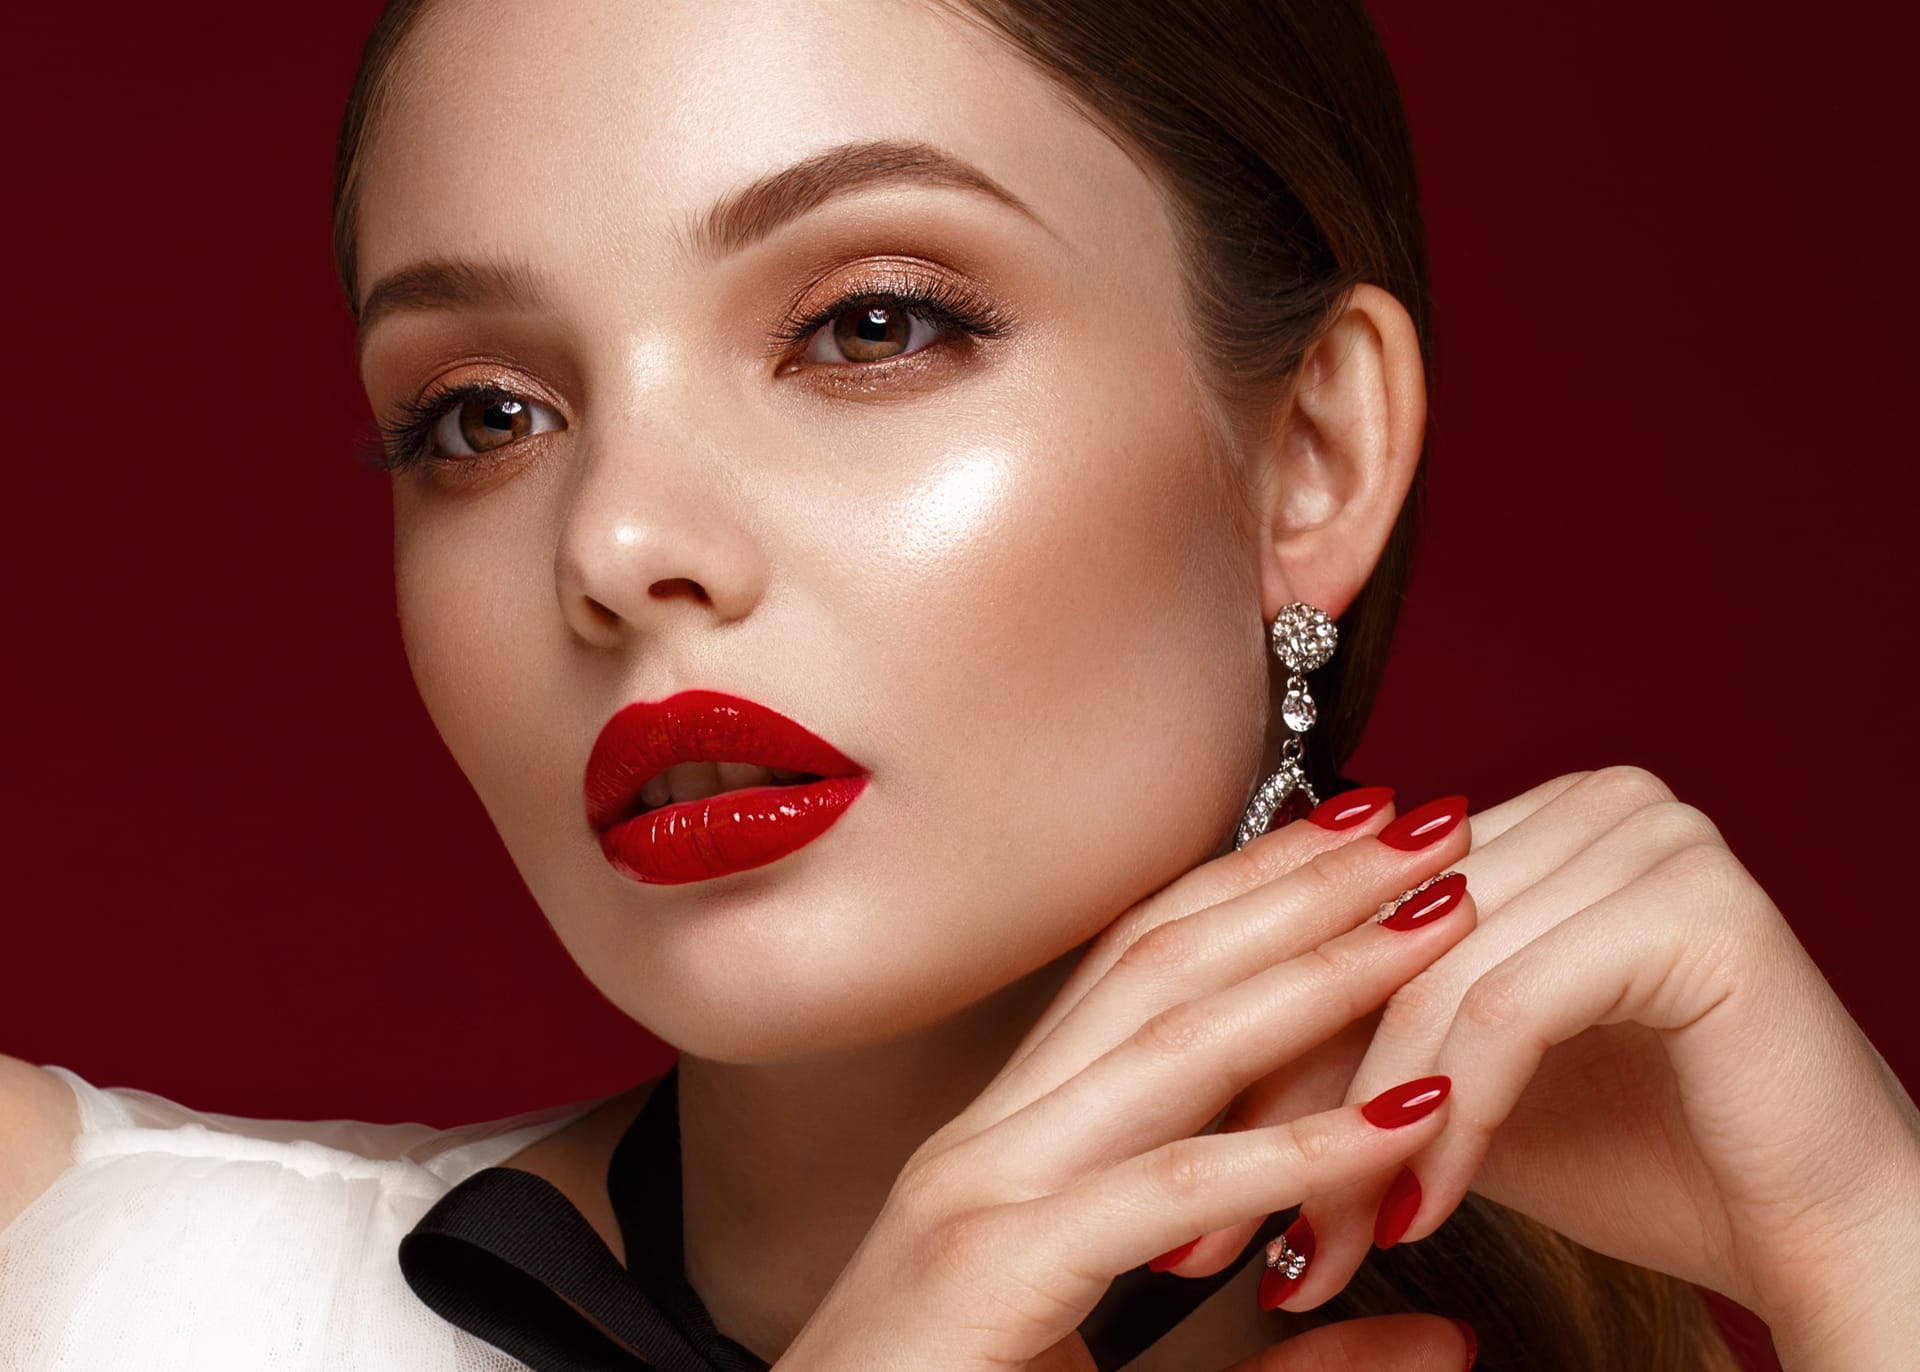 Classic makeup red manicure beauty face photo taken studio image